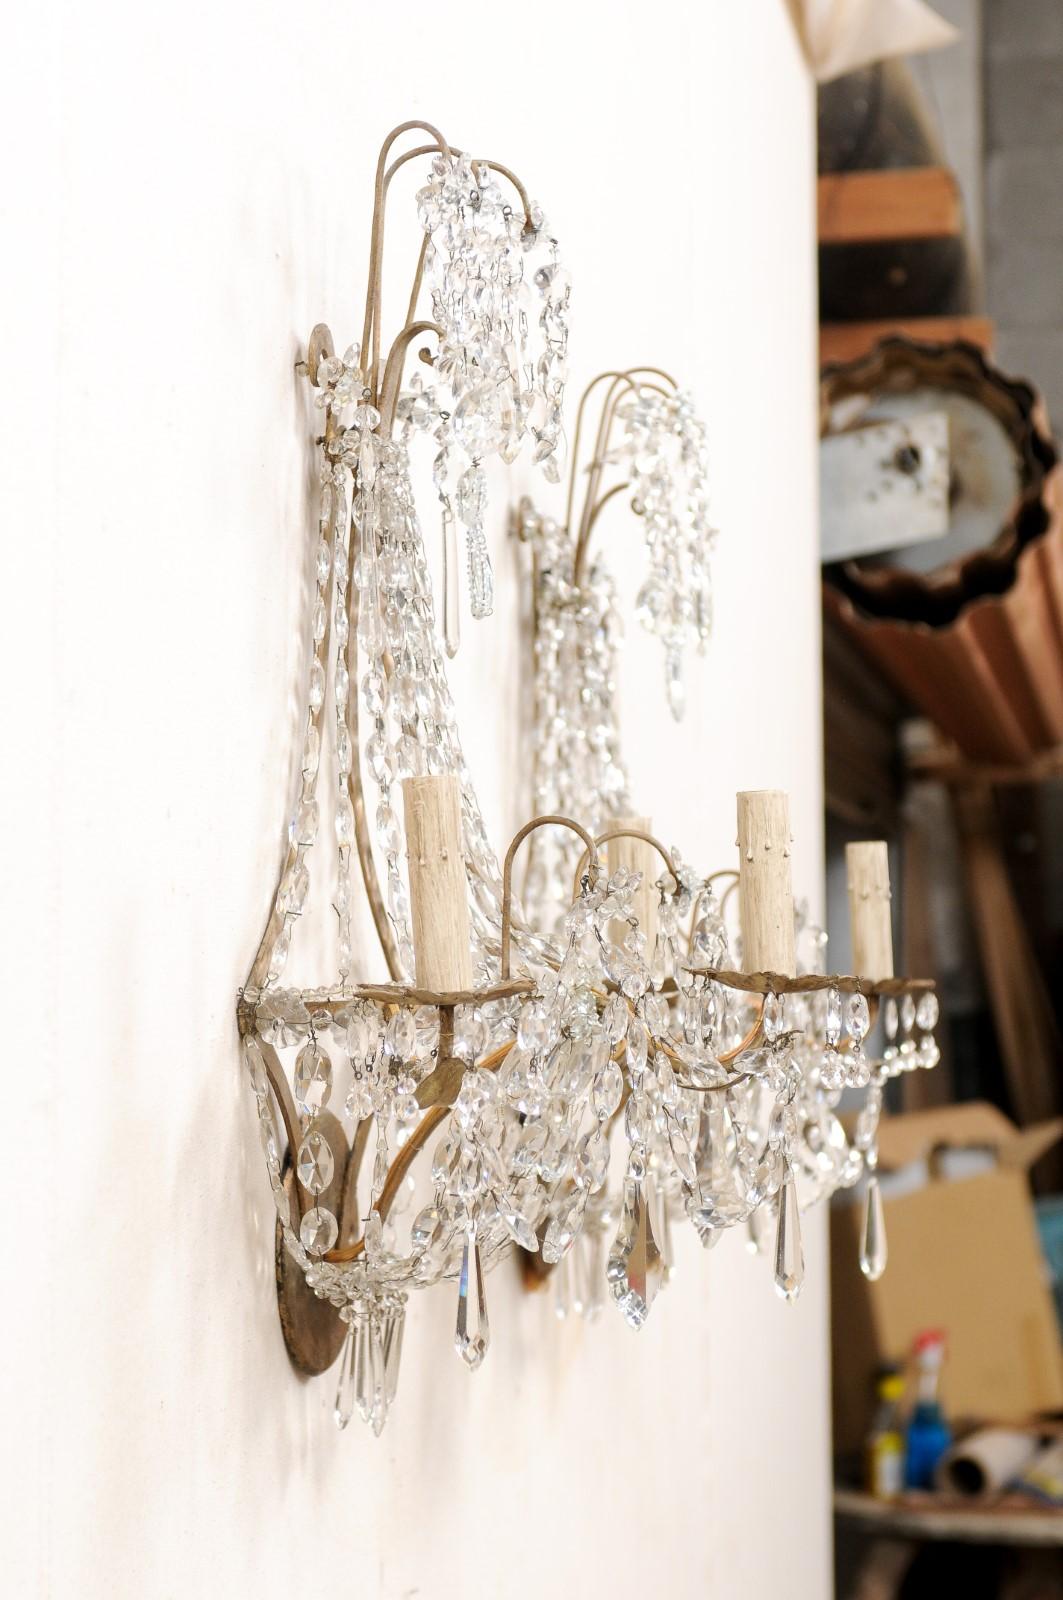 Elegant Pair of Mid-20th Century Crystal Waterfall Wall Sconces from France For Sale 5